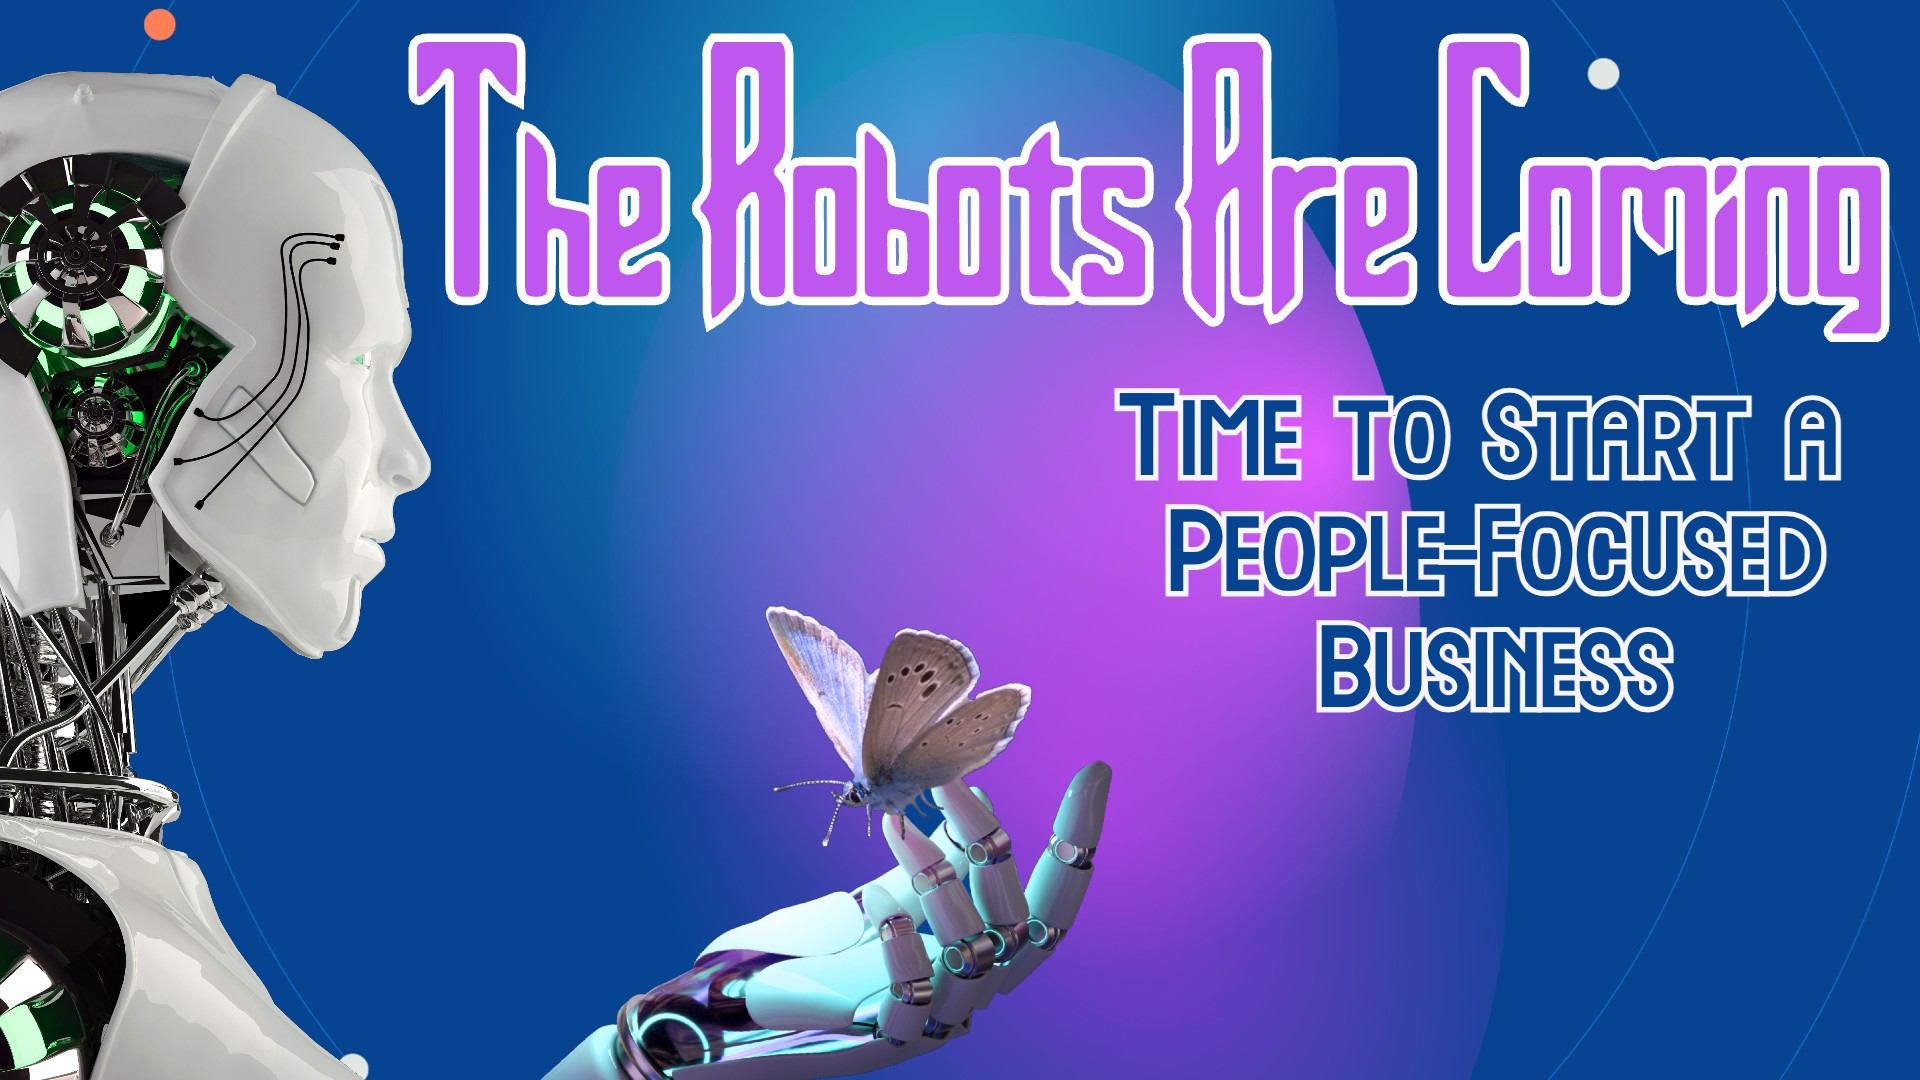 The Robots Are Coming: Time to Start a People-Focused Business